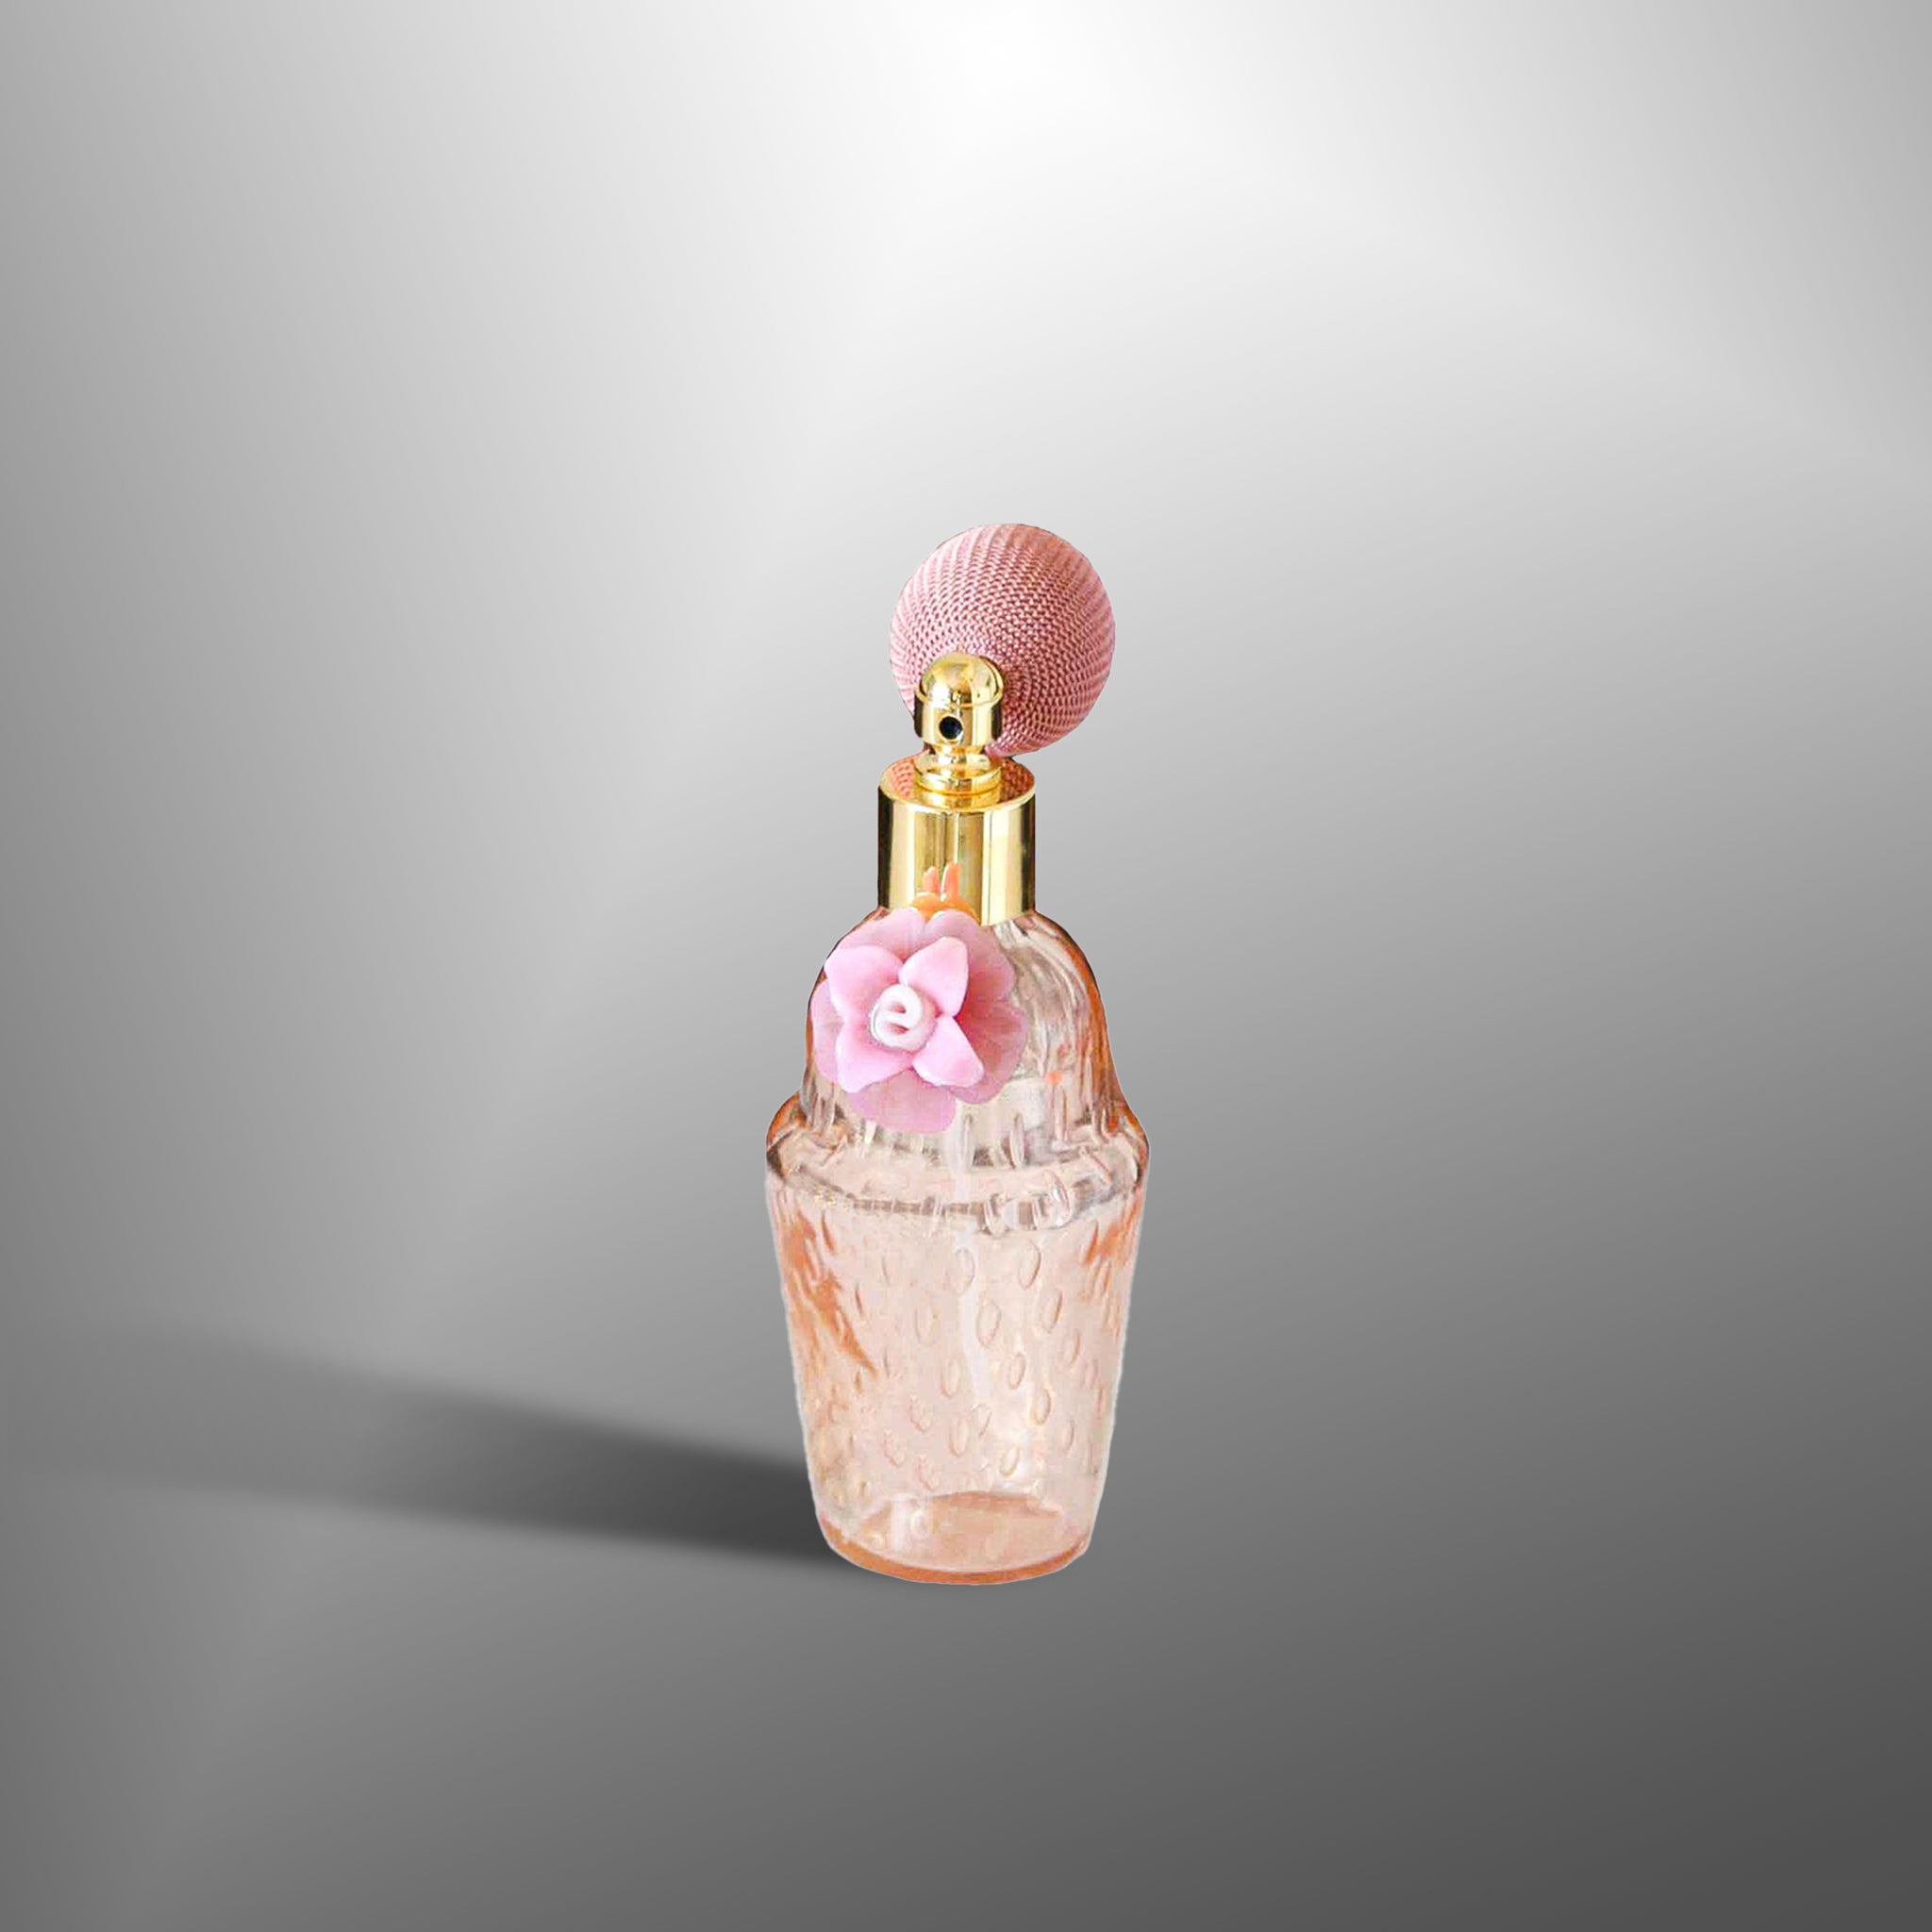 Parfume bottles in with Pink flowers